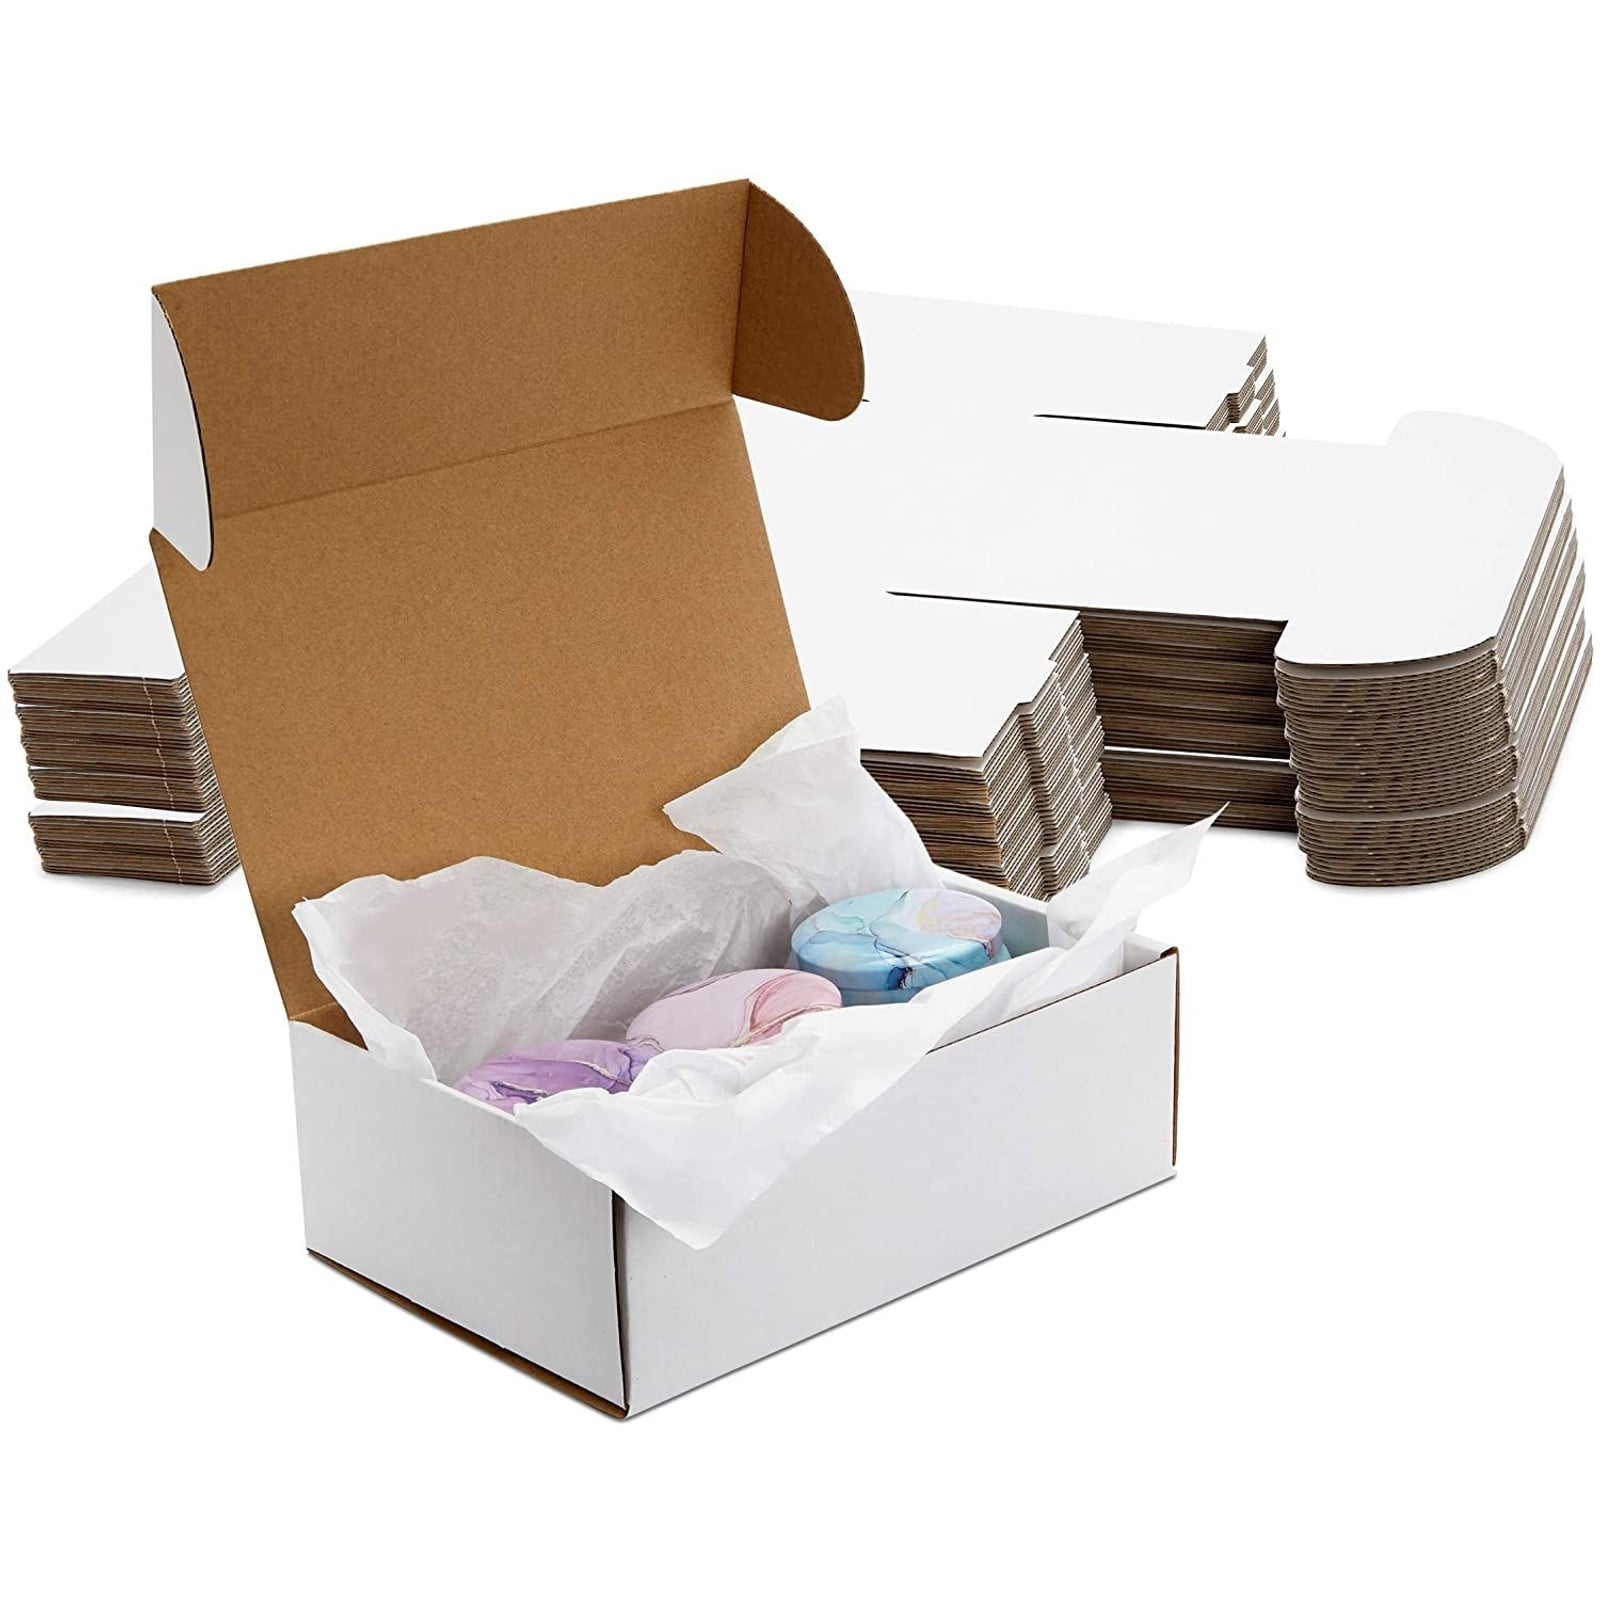 200 8x4x3 Cardboard Paper Boxes Mailing Packing Shipping Box Corrugated Carton 